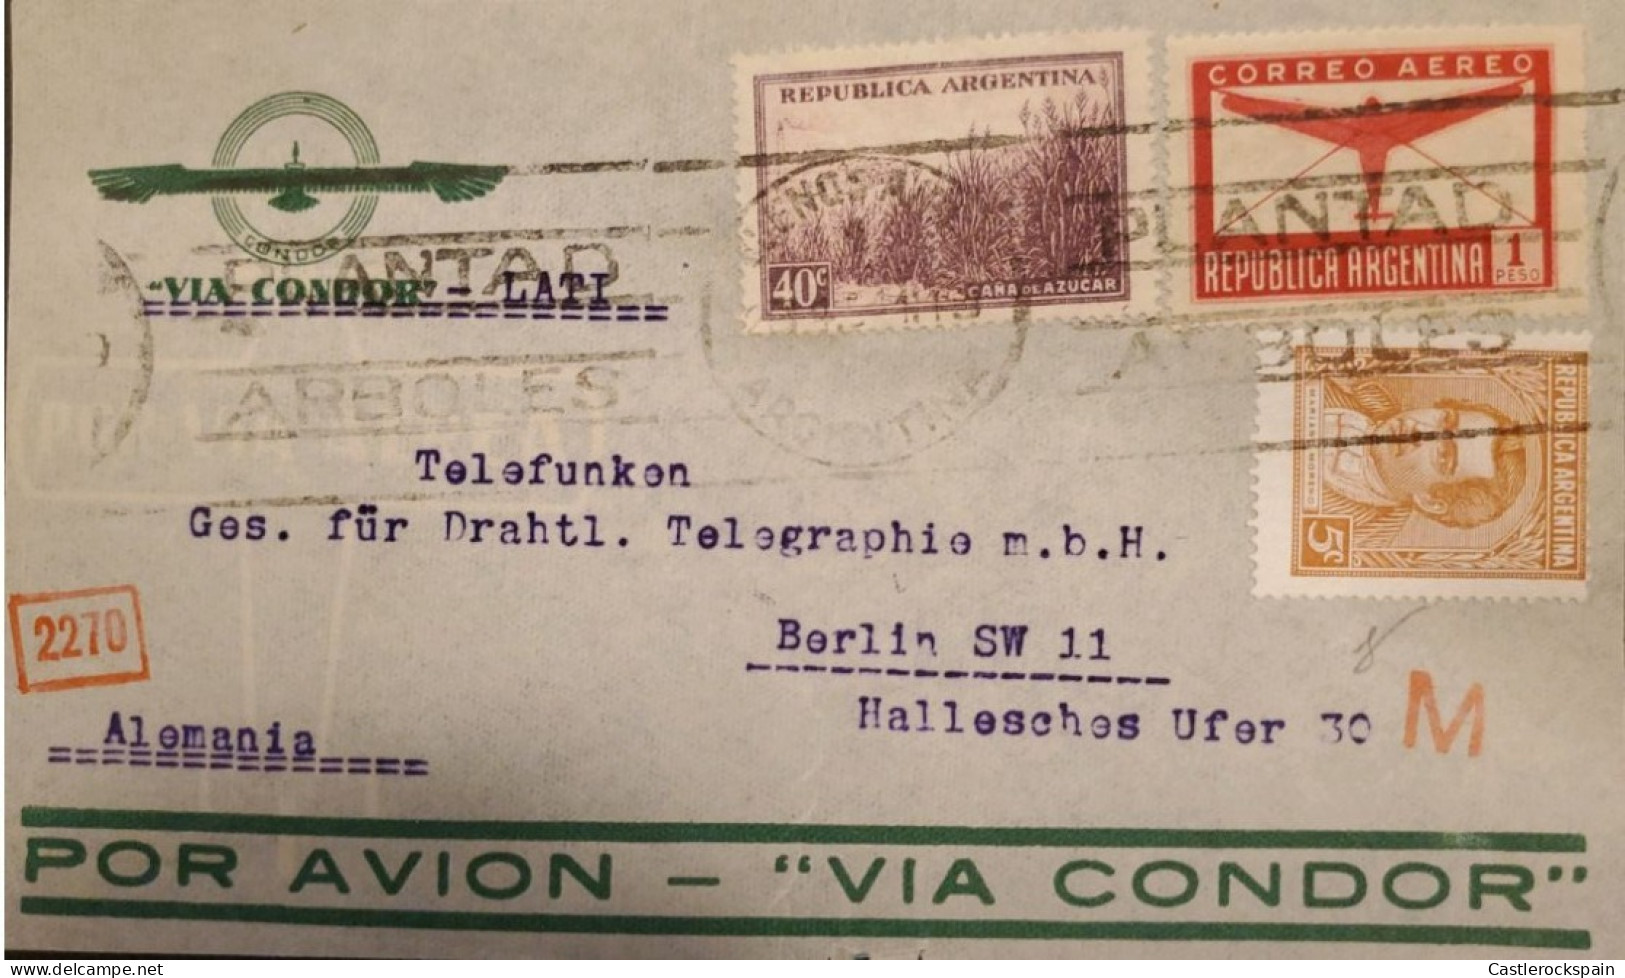 MI) 1936-42, ARGENTINA, AIR MAIL, VIA CONDOR, FROM BUENOS AIRES TO GERMANY, WITH CANCELLATION SLOGAN, MARIANO MORENO STA - Gebruikt